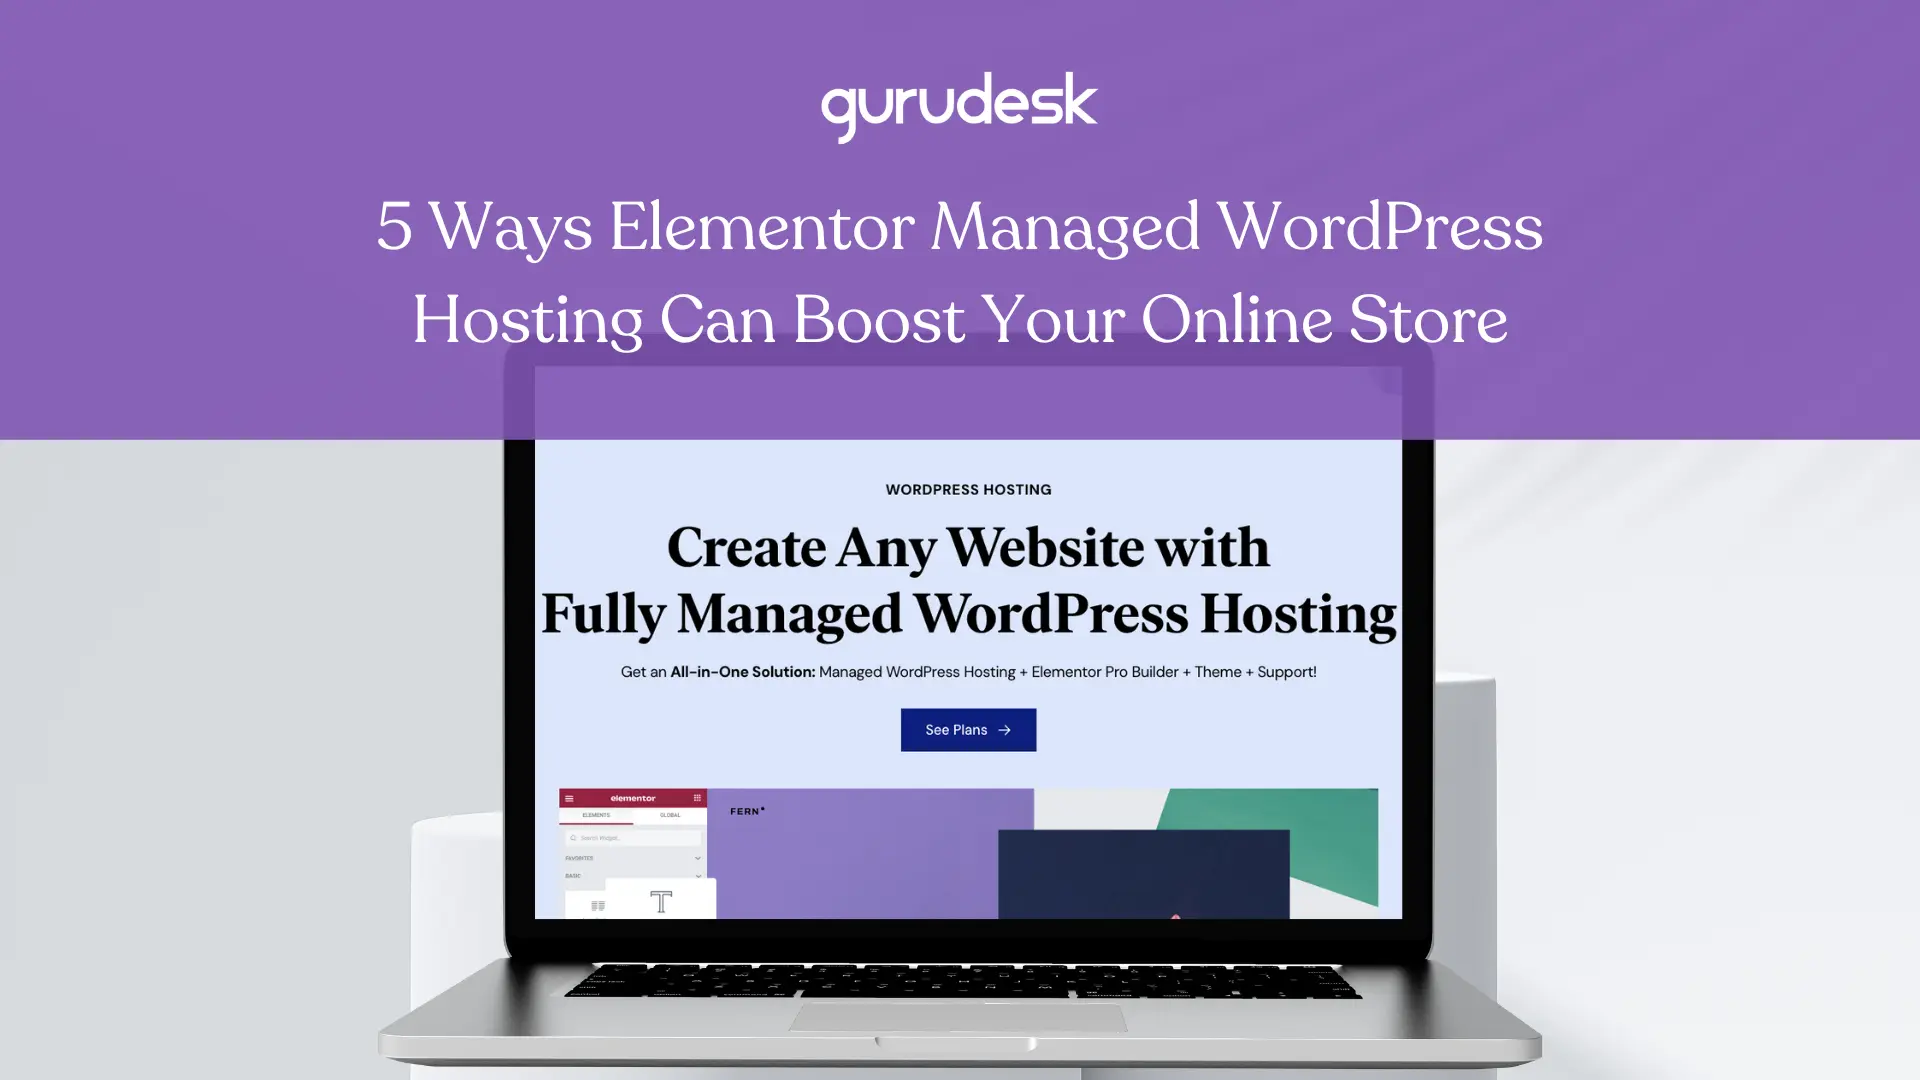 5 Ways Elementor Managed WordPress Hosting can boost your online store